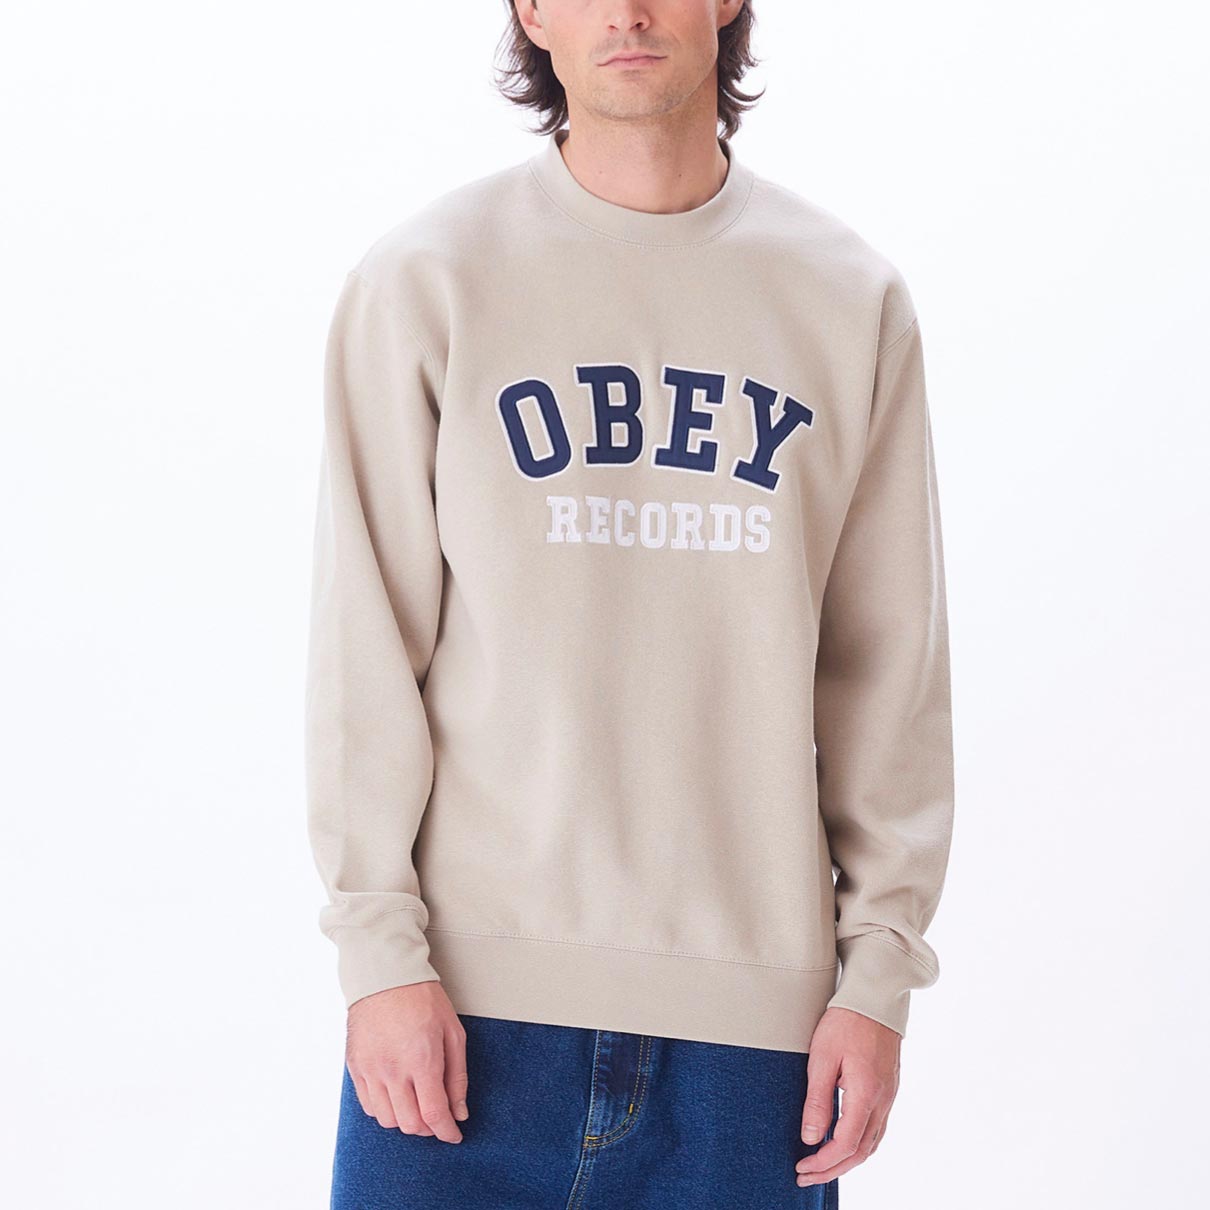 Obey Records Sweat - Silver Grey